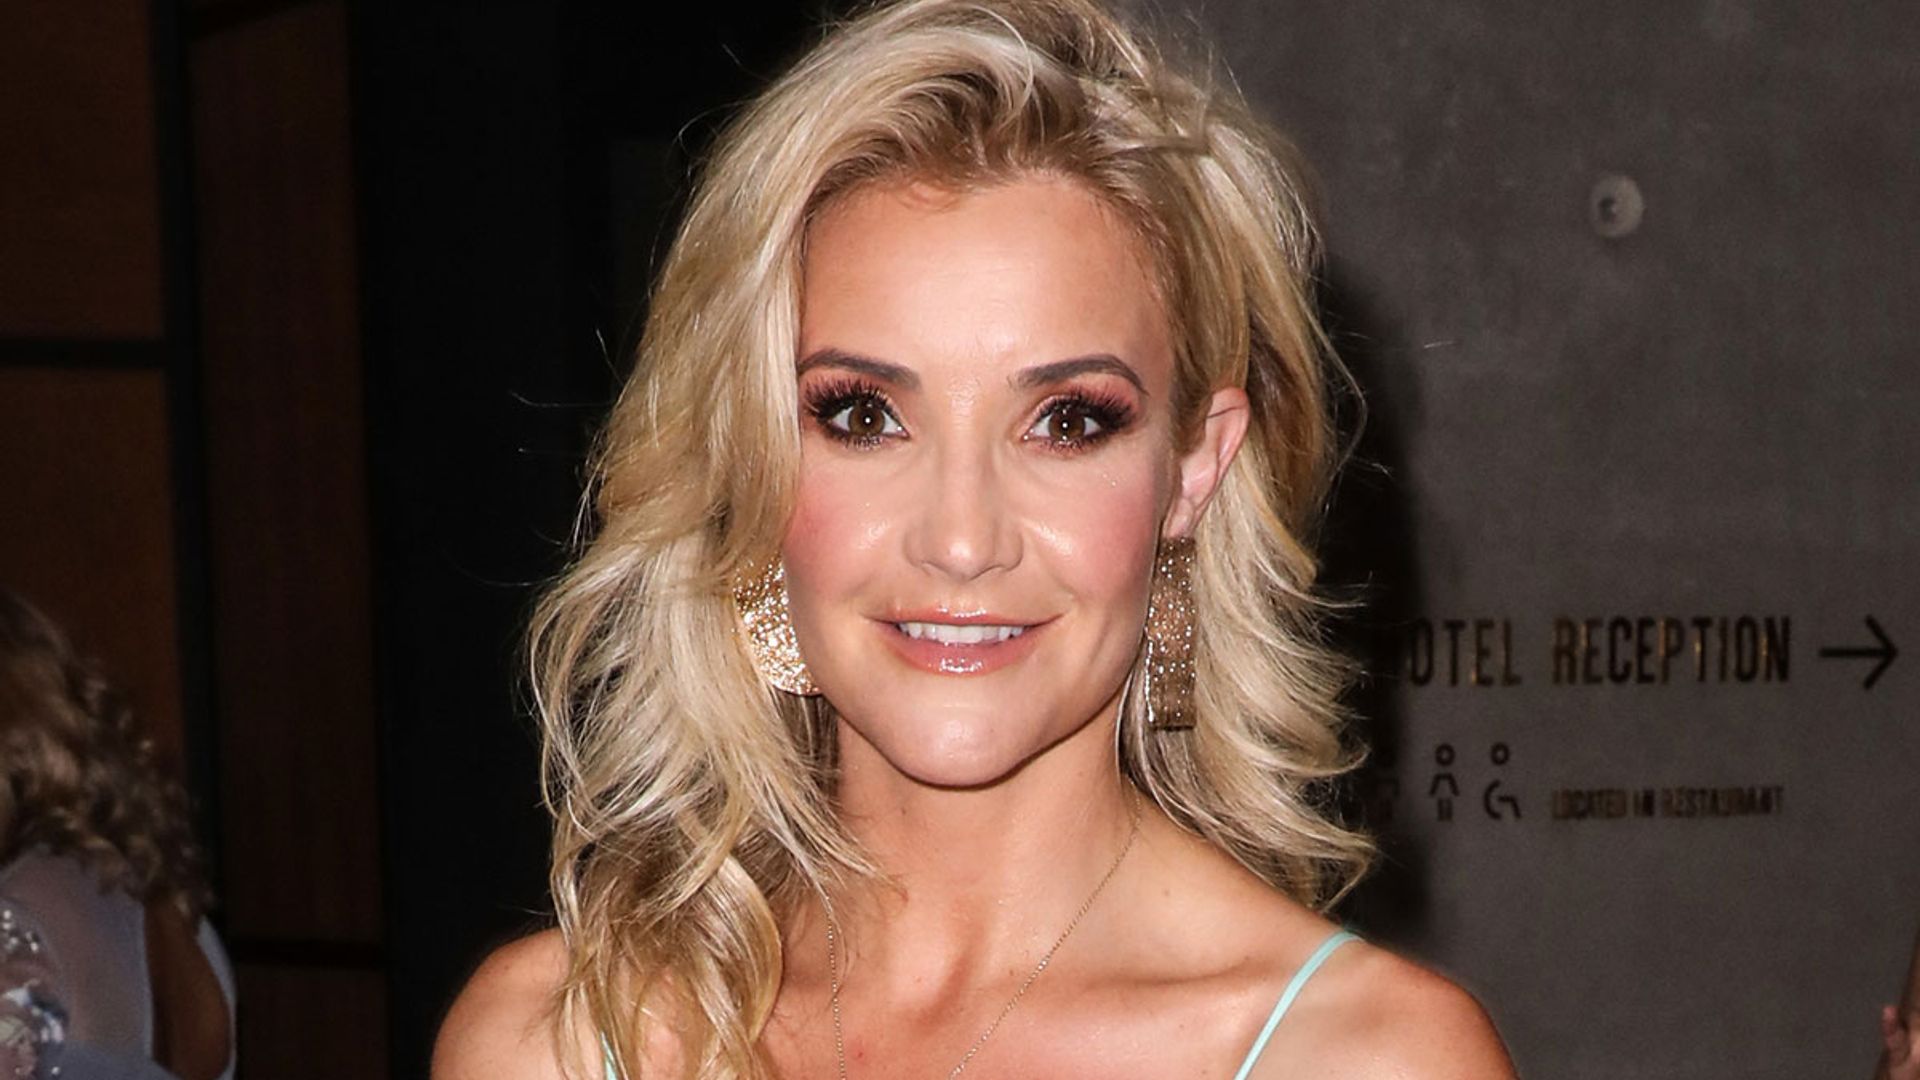 Helen Skelton reflects on special bond with baby daughter amid marriage heartache